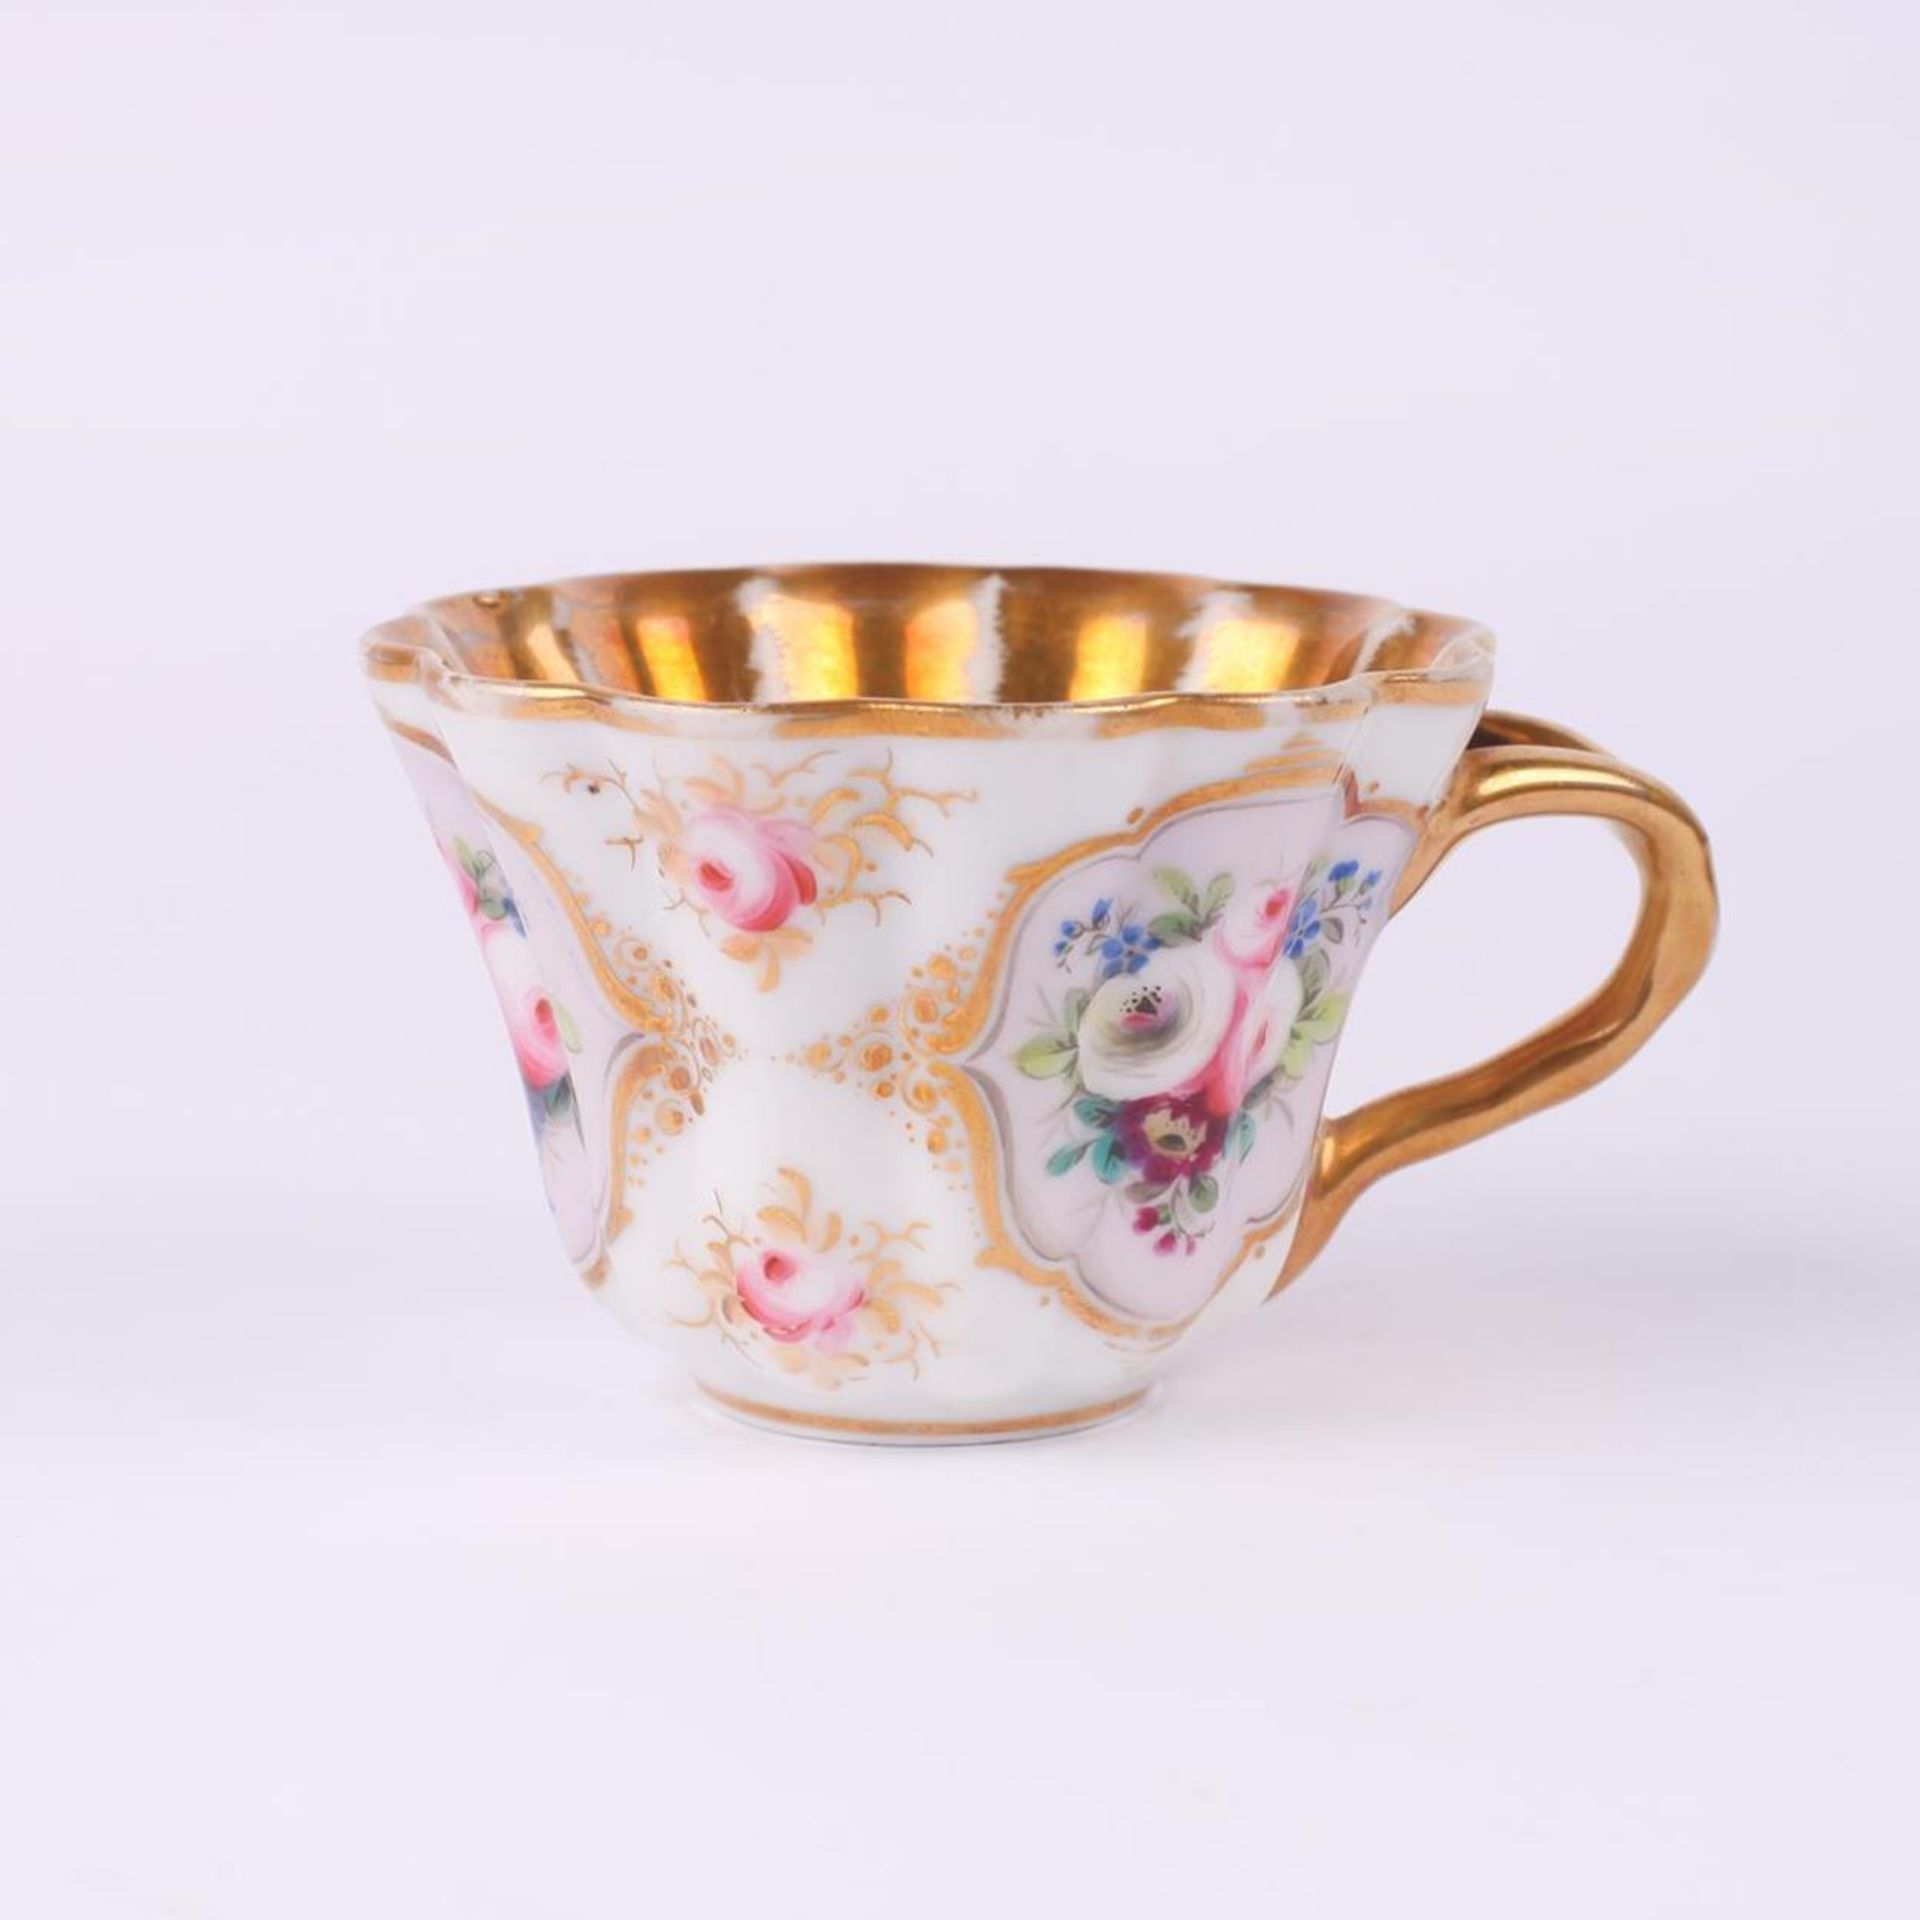 Tea cup and saucer set with flower painting. Kudinov Porceline Factory (?). Russia. 1820s. - Image 7 of 10